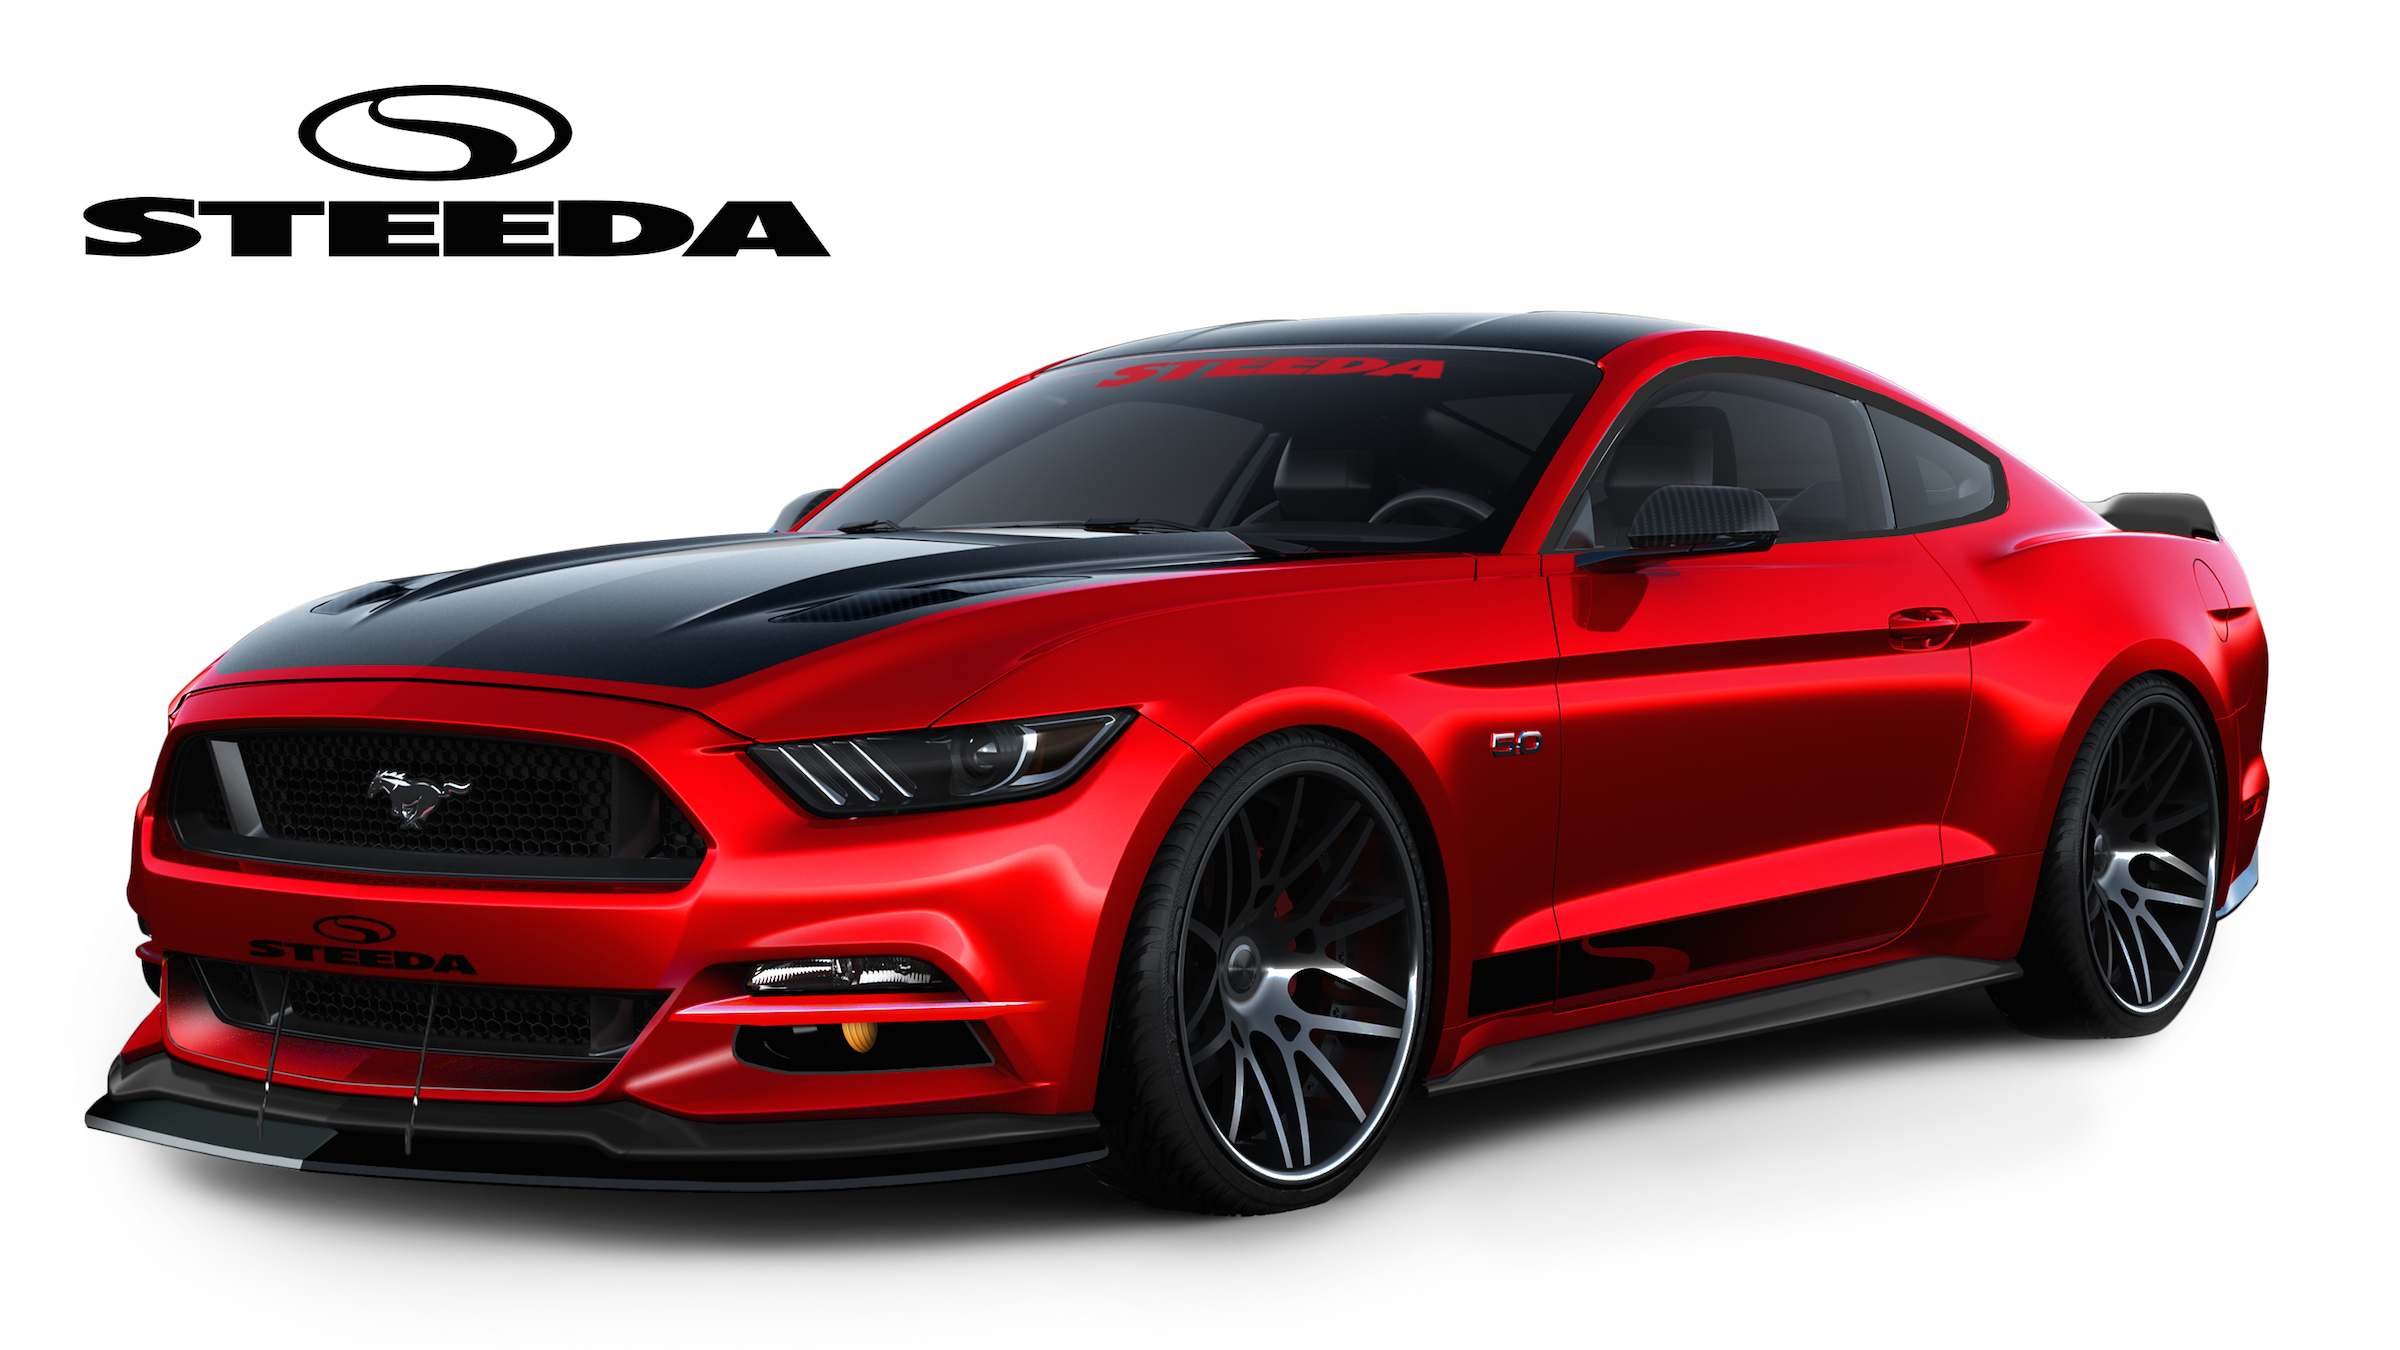 Steeda's Q-Series 2015 Ford Mustang Pumps Out 775 Horses, Looks the ...